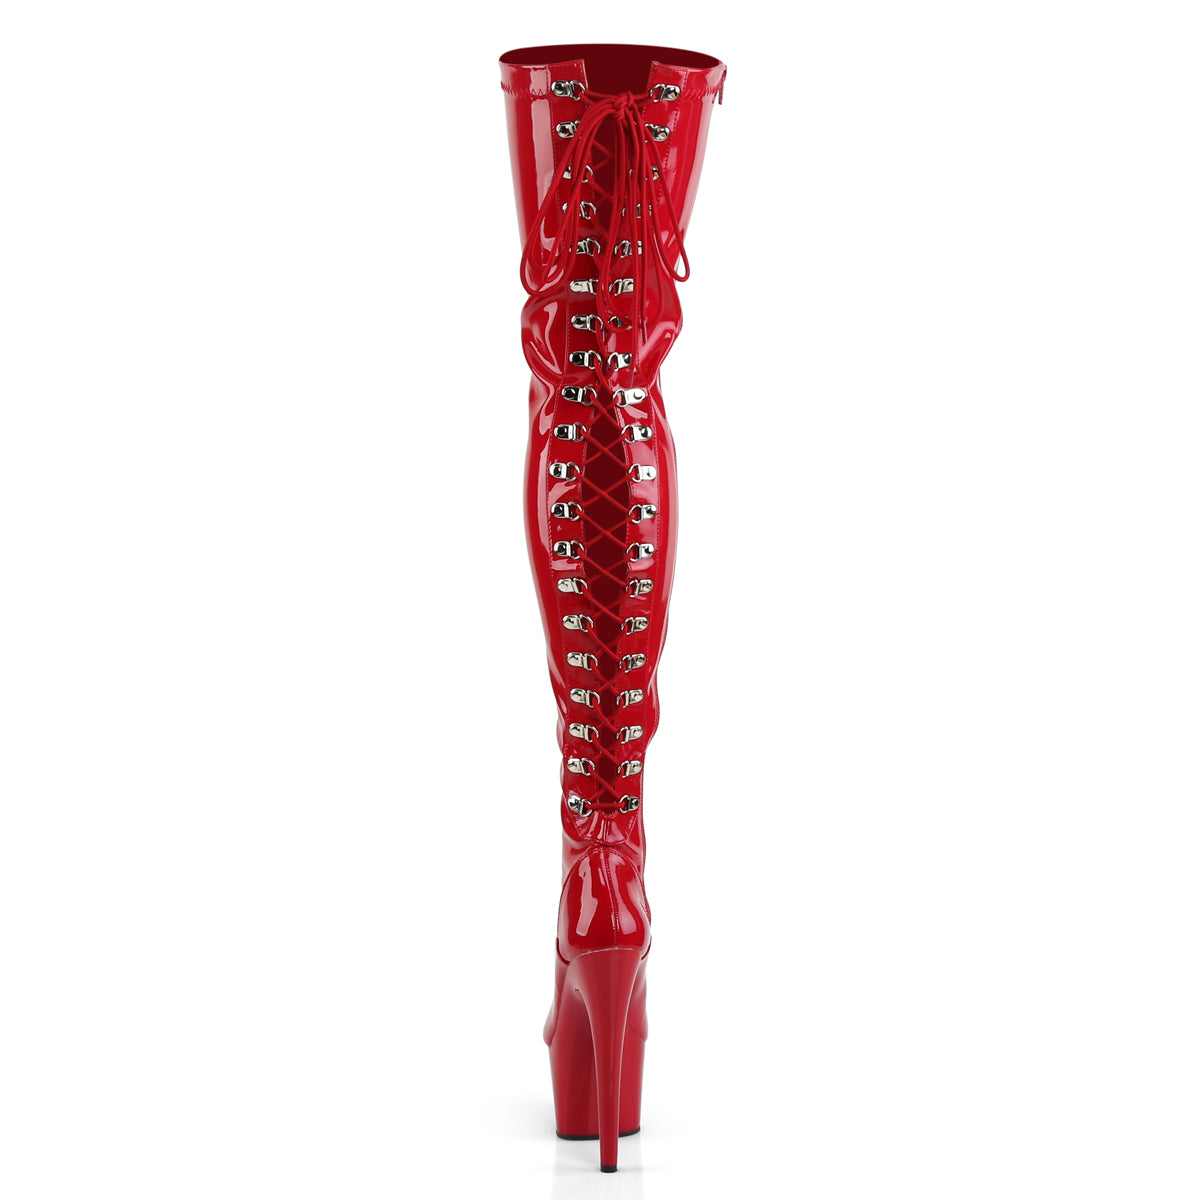 ADORE-3063 Pleaser 7 Inch Heel Red Pole Dancing Kinky Boots-Pleaser- Sexy Shoes Fetish Footwear